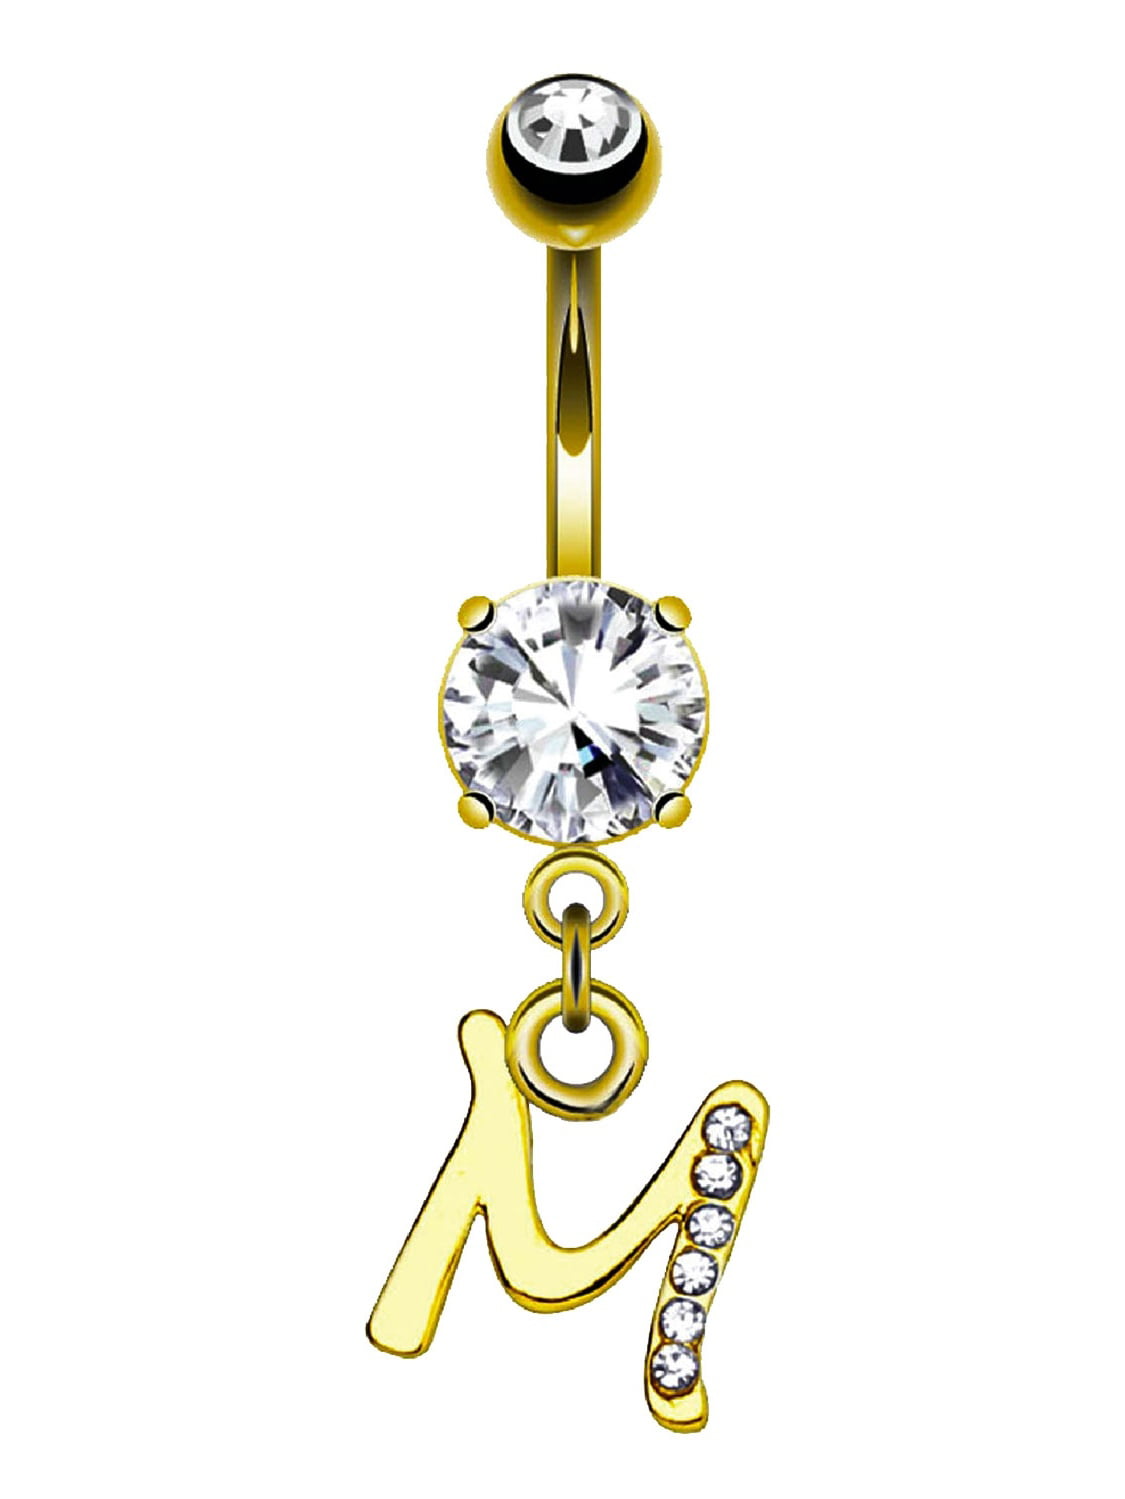 New Bollywood Dance Goldtone Dangling Jingle Bells Chain DBL Clear Belly Ring KEZ-3518